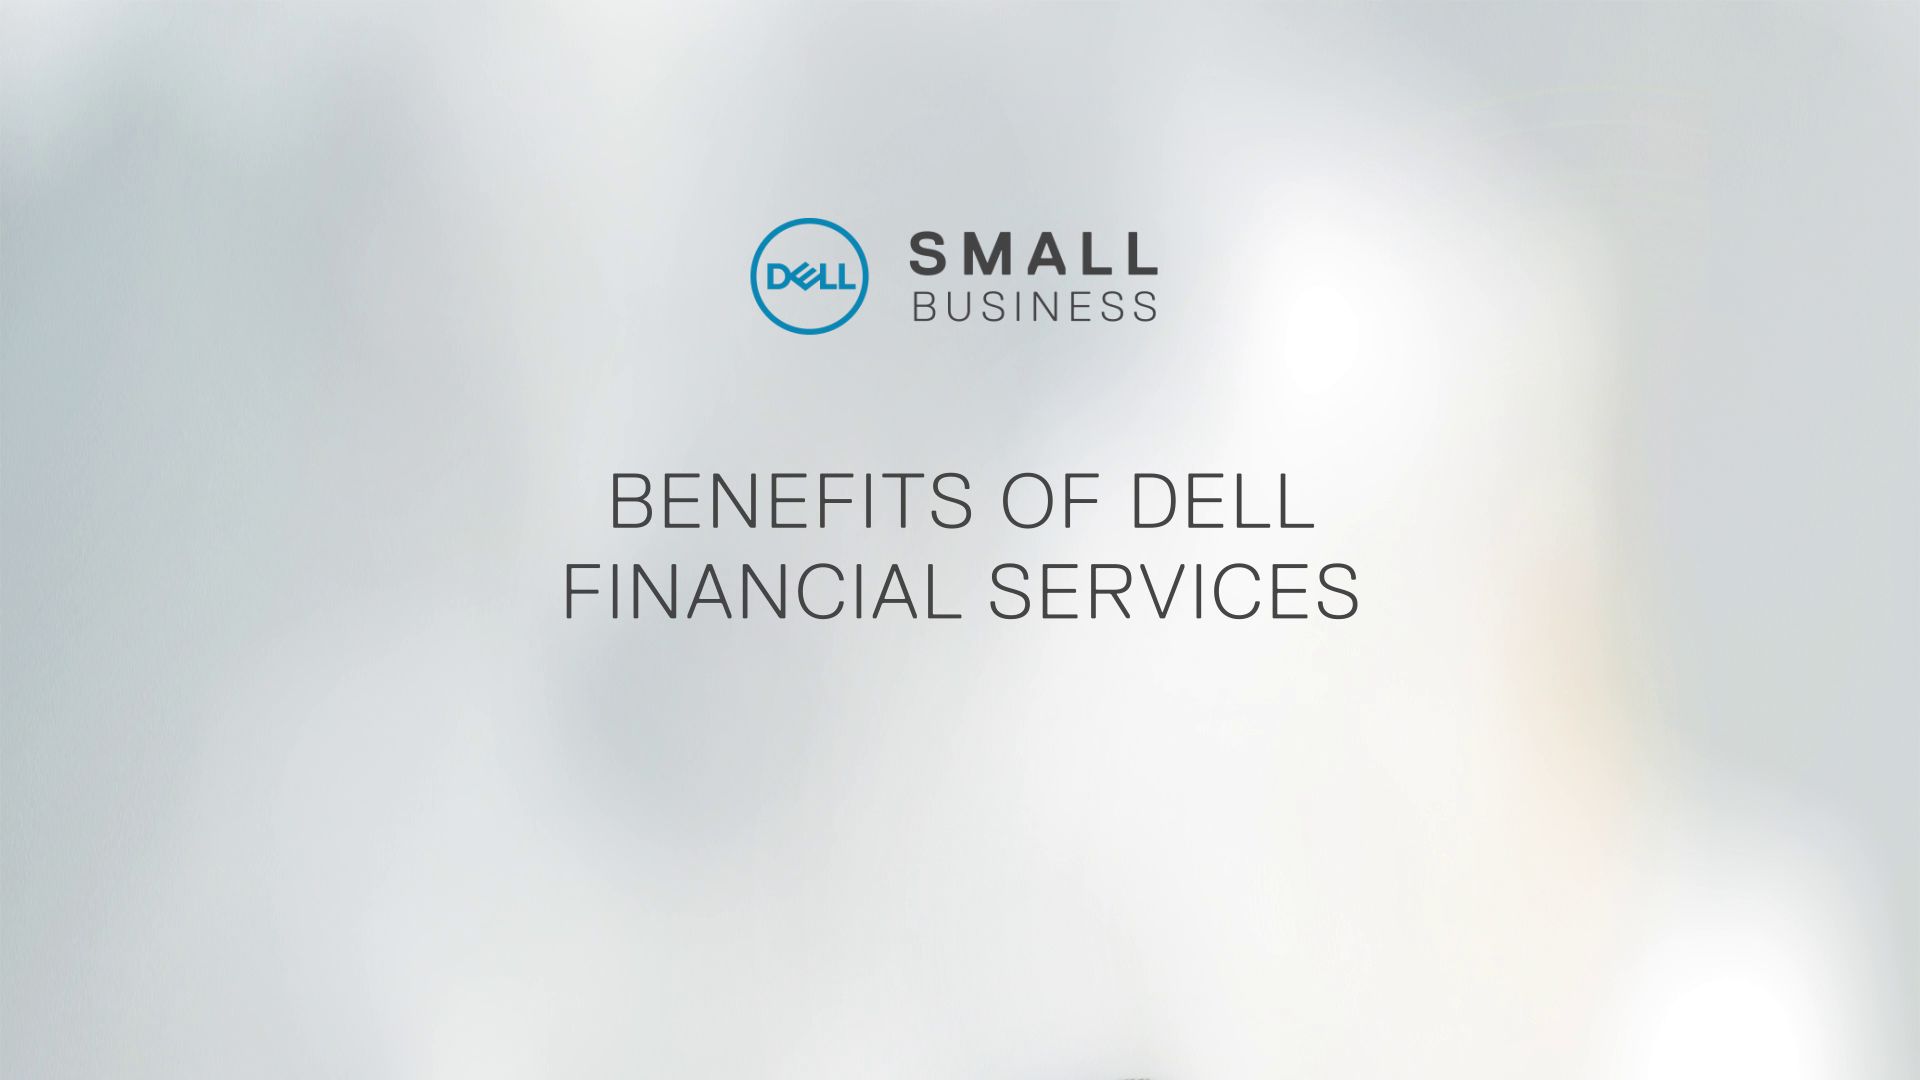 Small Business Financing Leasing Dell